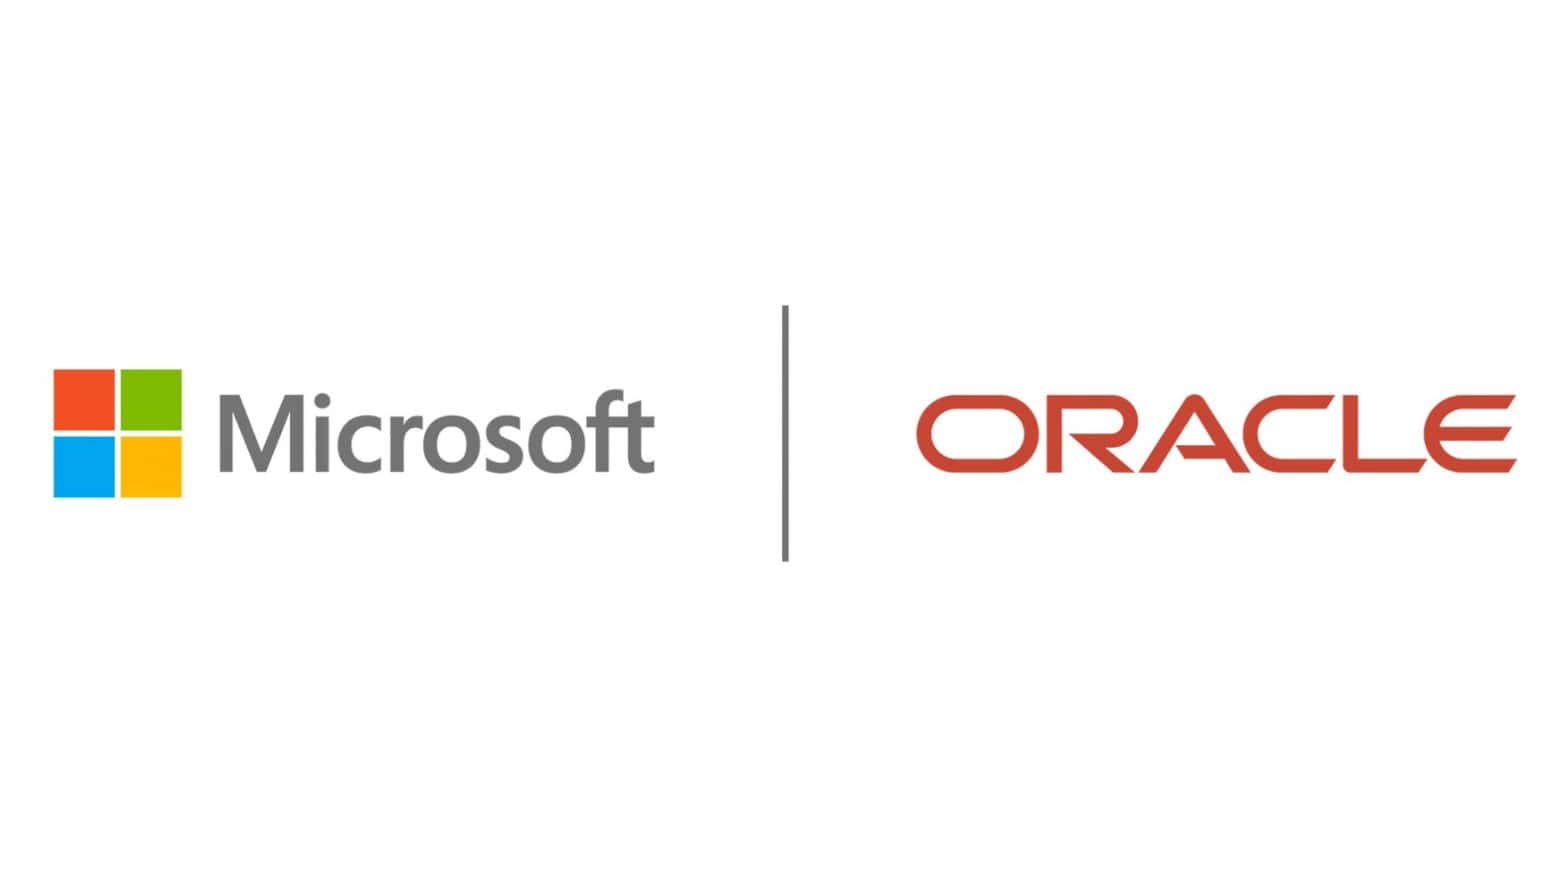 Microsoft now using Oracle Cloud Infrastructure to support the explosive growth of its AI services